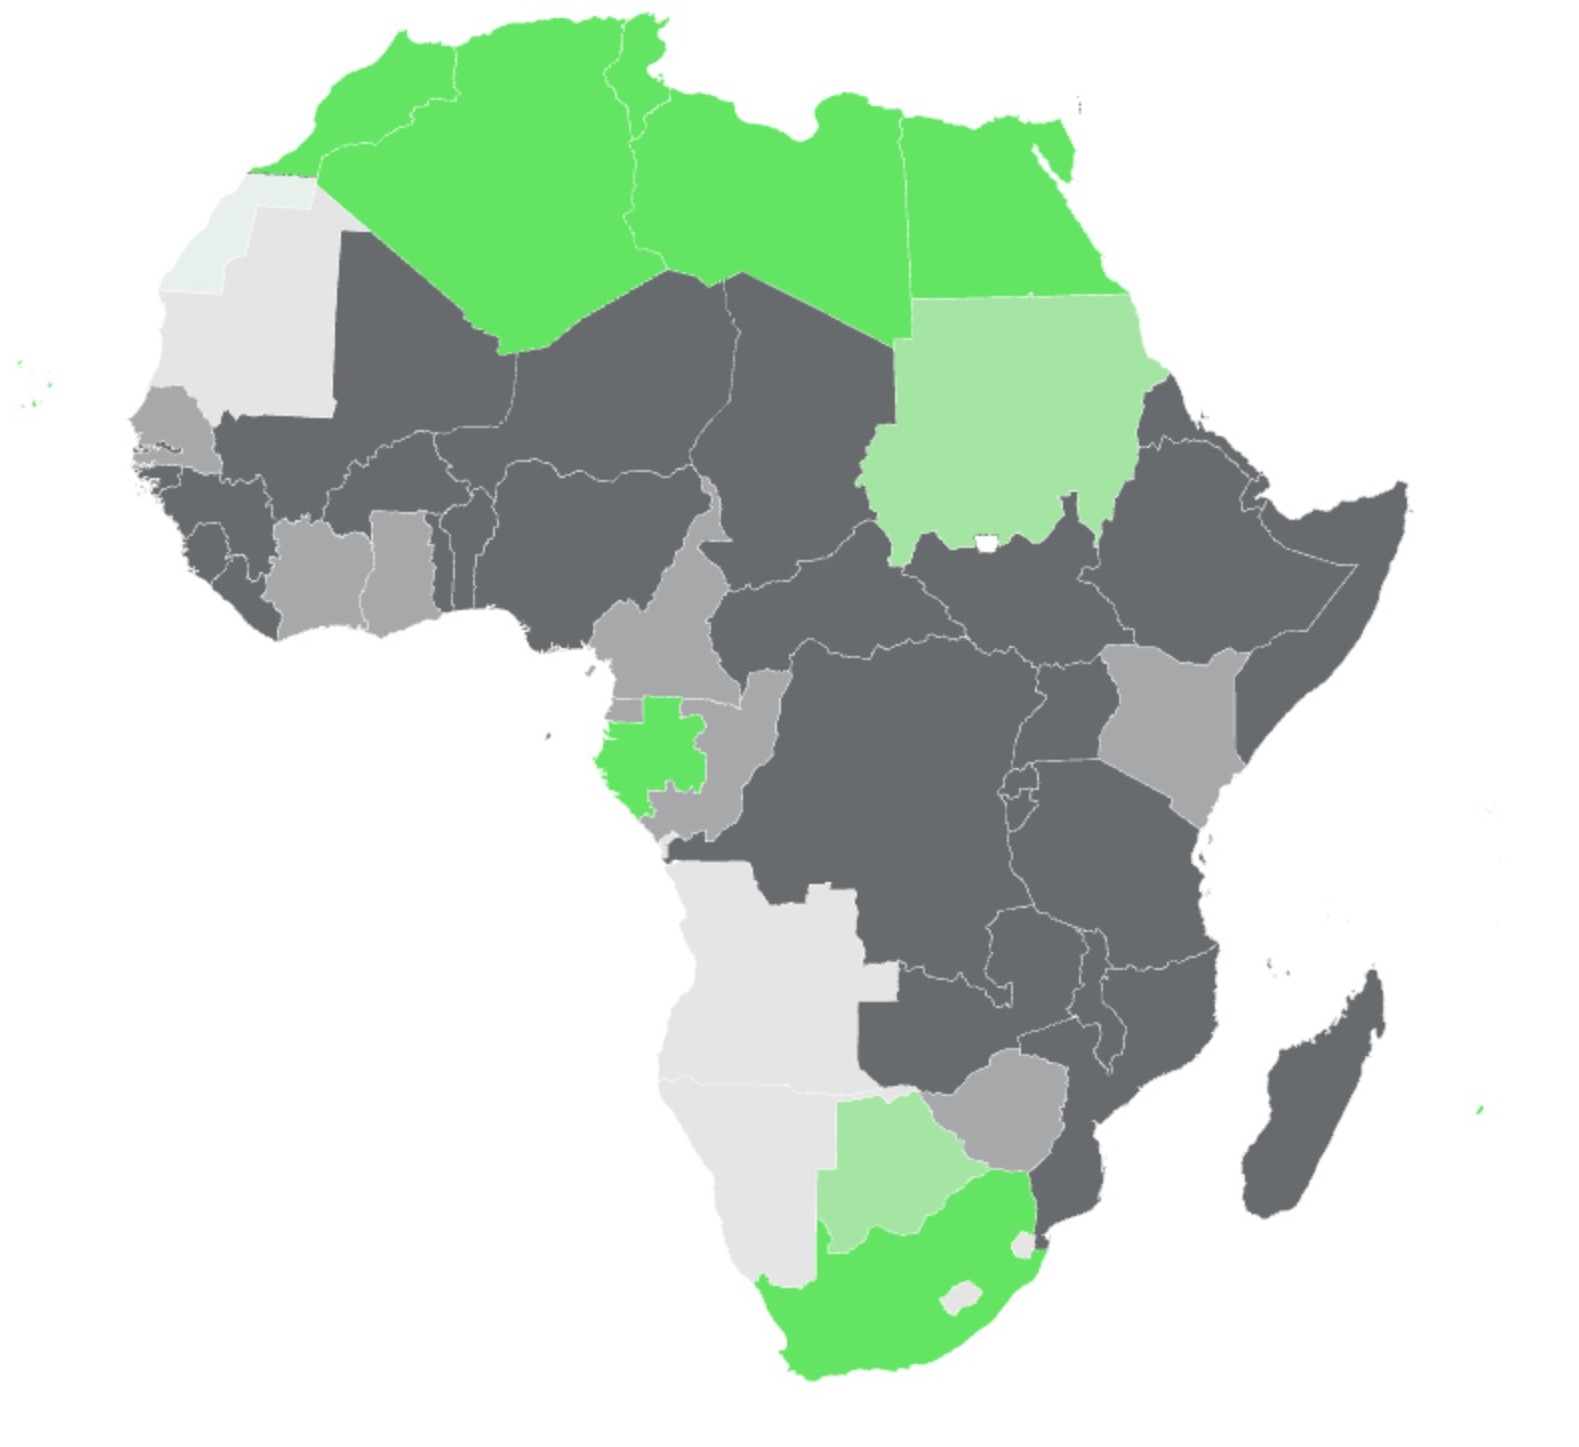 A map of Africa with countries in different colors based on their level of access to clean cooking